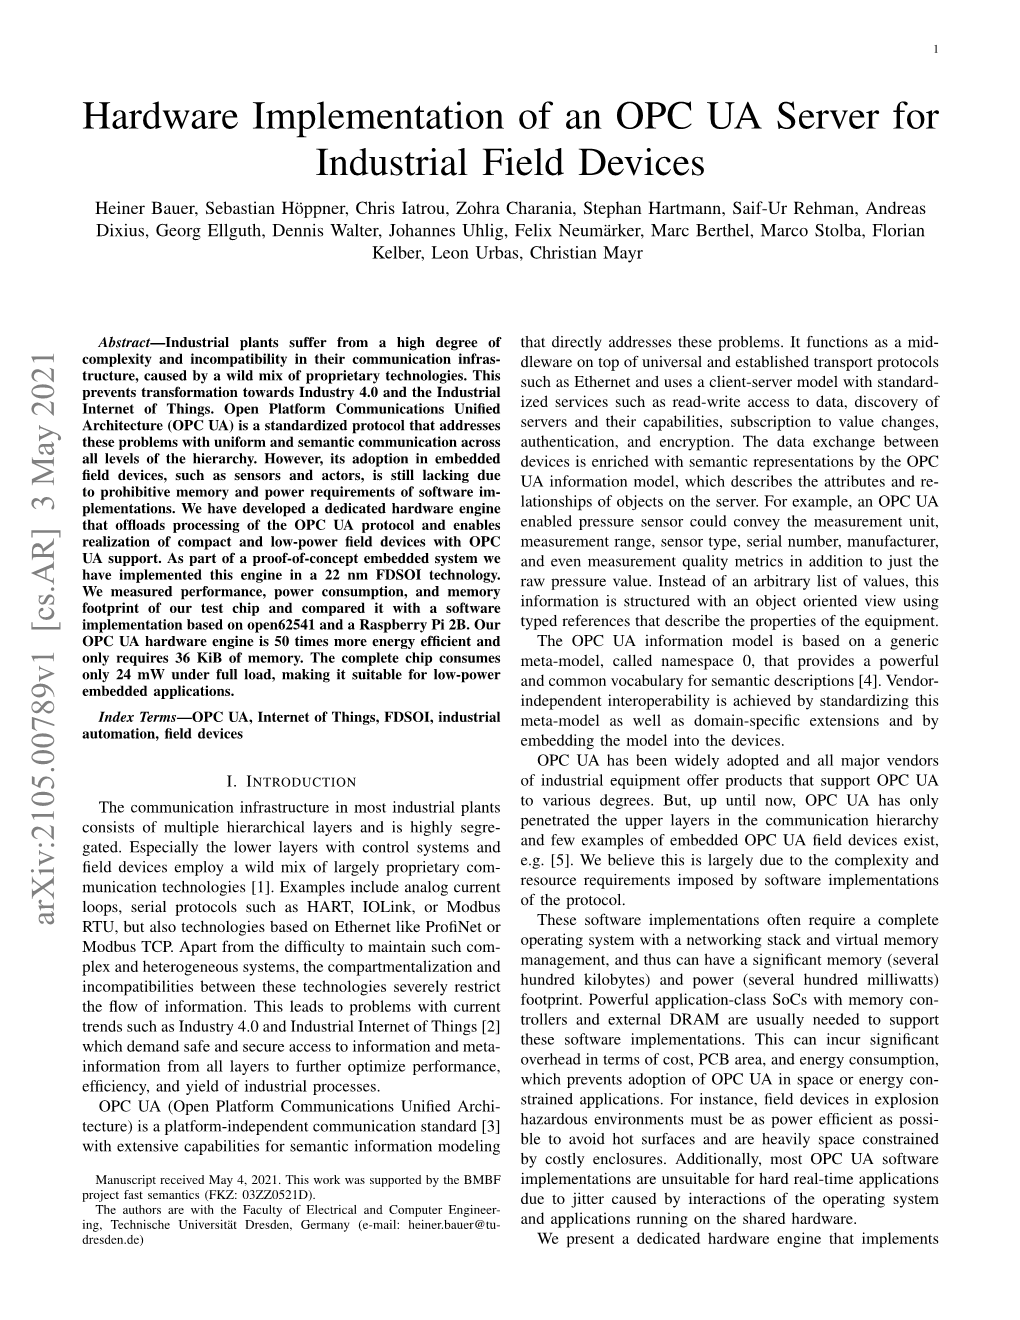 Hardware Implementation of an OPC UA Server for Industrial Field Devices